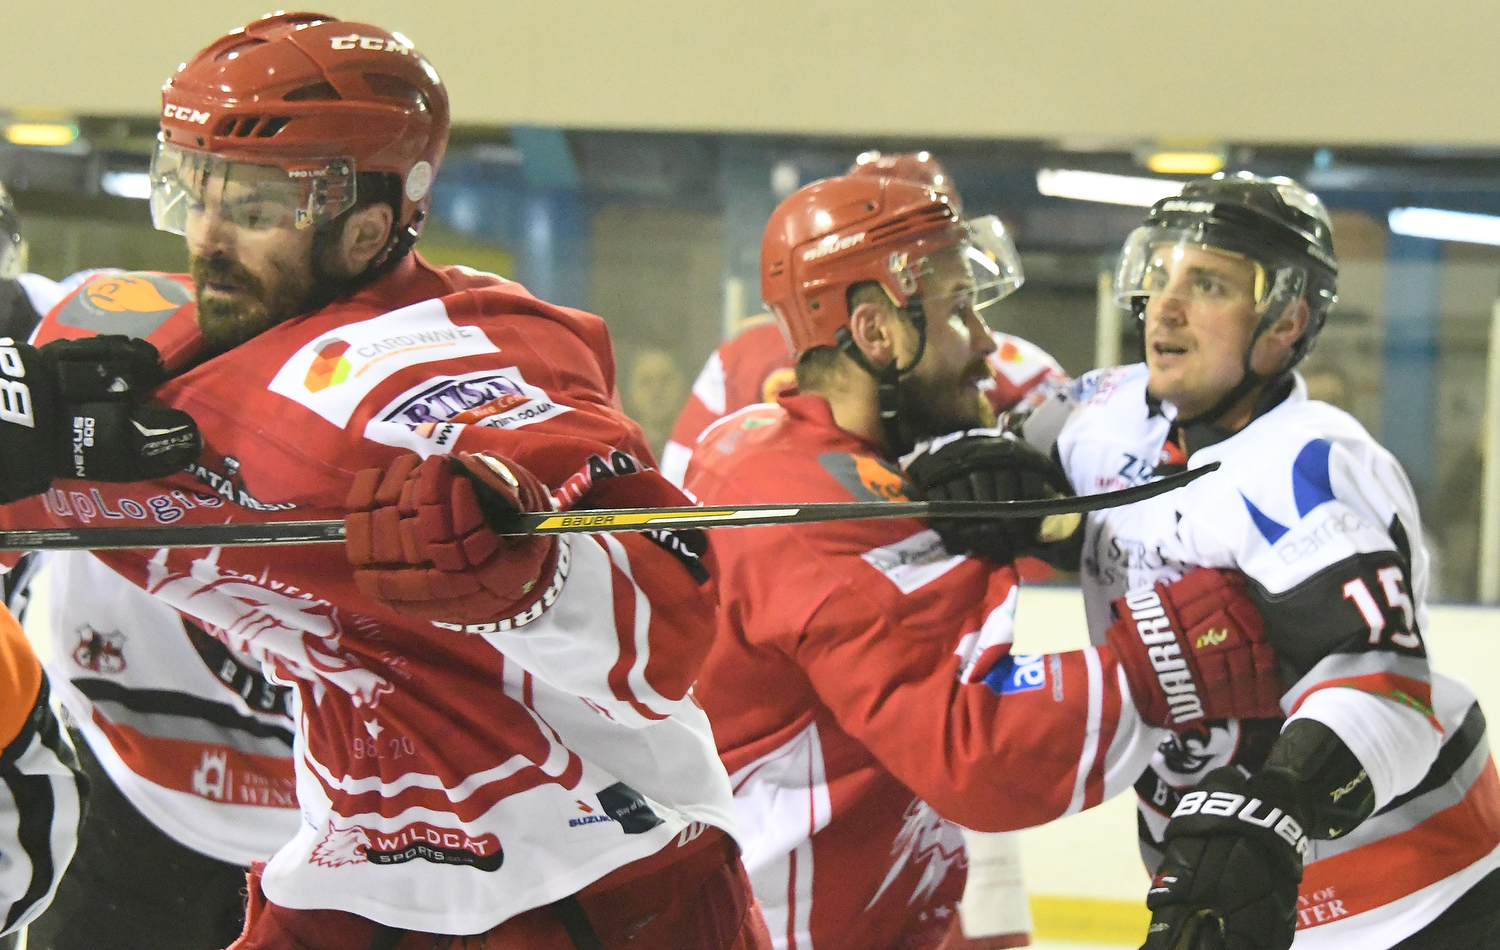 Sam Bullas signs on for a further year at the Swindon Wildcats